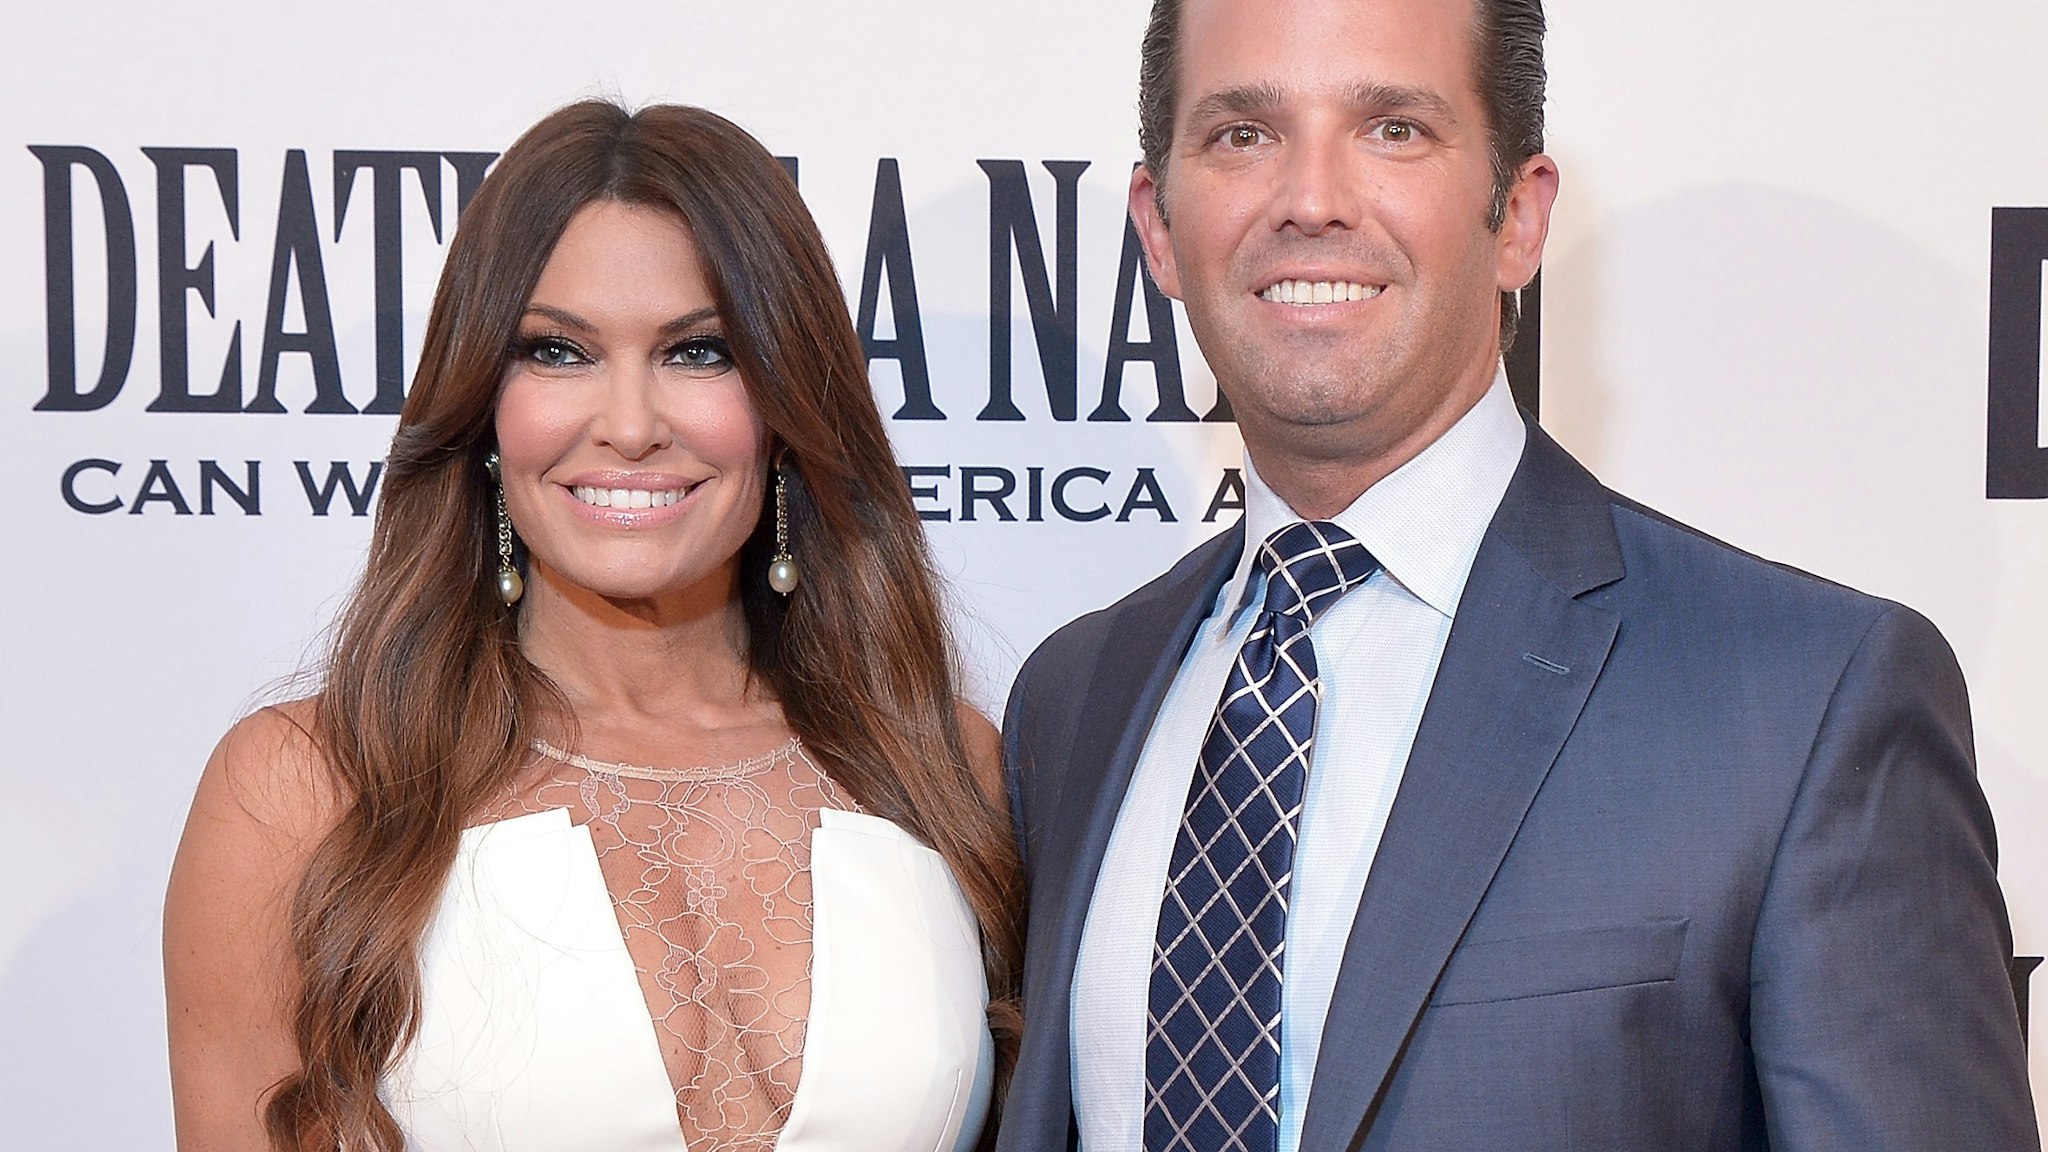 WASHINGTON, DC - AUGUST 01: Donald Trump, Jr. and Kimberly Guilfoyle attend the DC premiere of the film, "Death of a Nation," at E Street Cinema on August 1, 2018 in Washington, DC. (Photo by